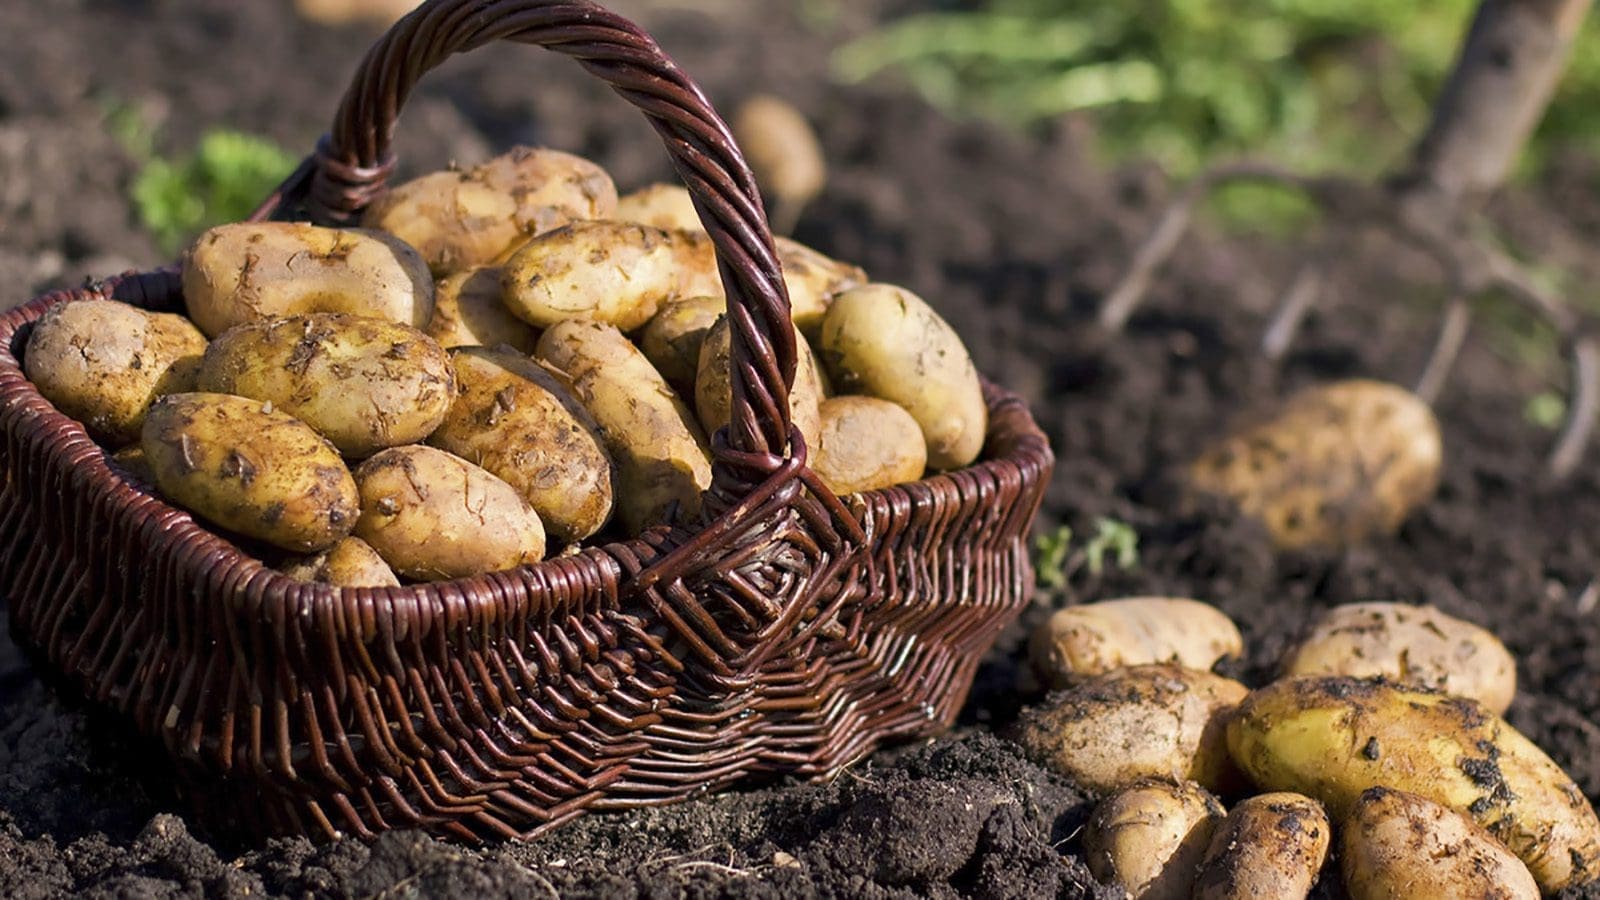 USAID’s Feed the Future Initiative backs potato project aimed to curb loss caused by late blight disease